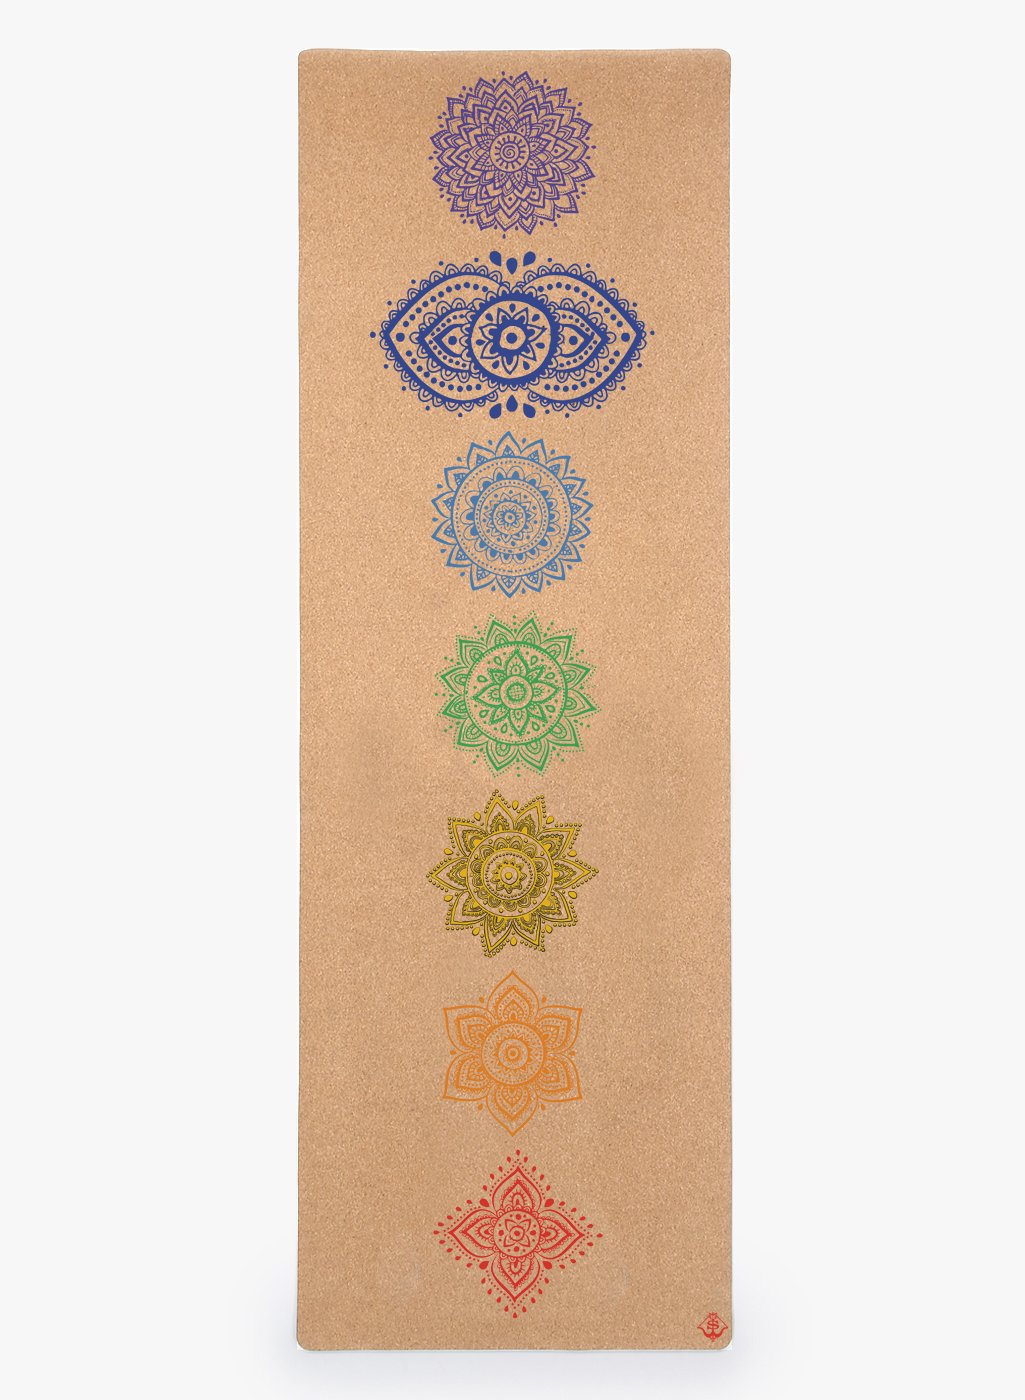 Shakti Warrior Chakra Cork Yoga Mat - Elevate balance and tranquility with this inspiring, eco-friendly mat. Order now for a mindful yoga experience!